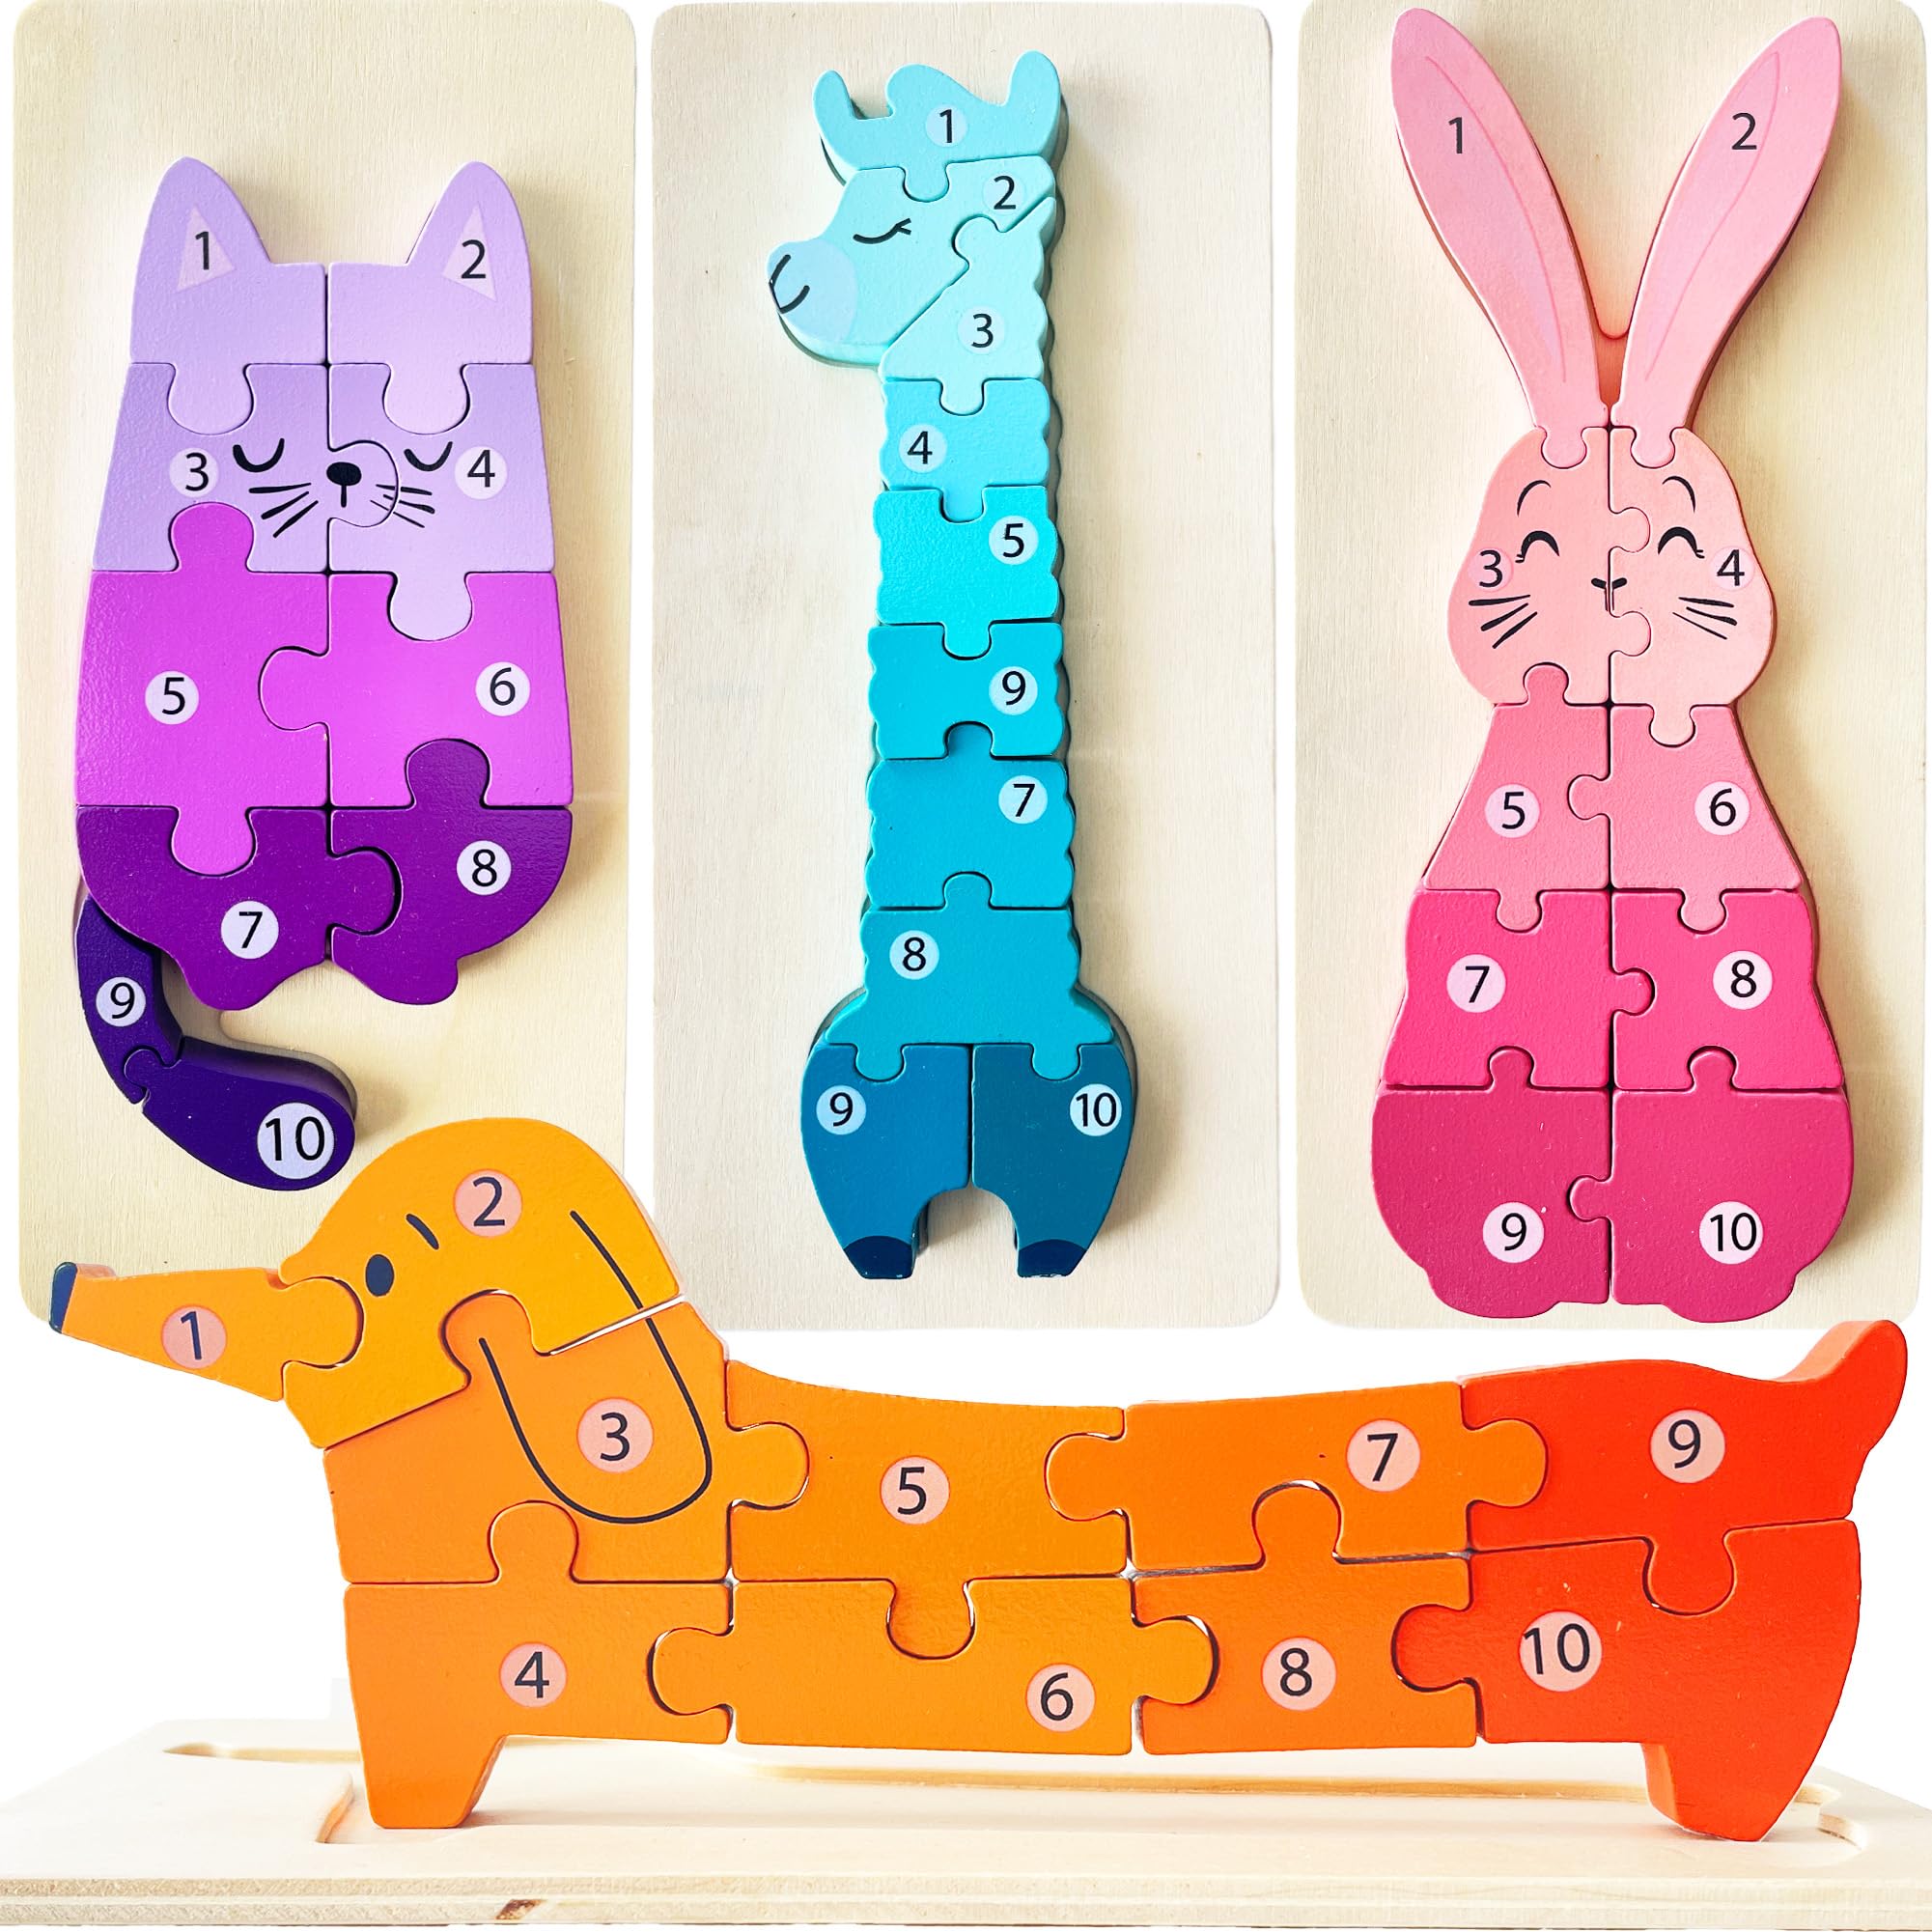 Hapinest Wooden Jigsaw Puzzles